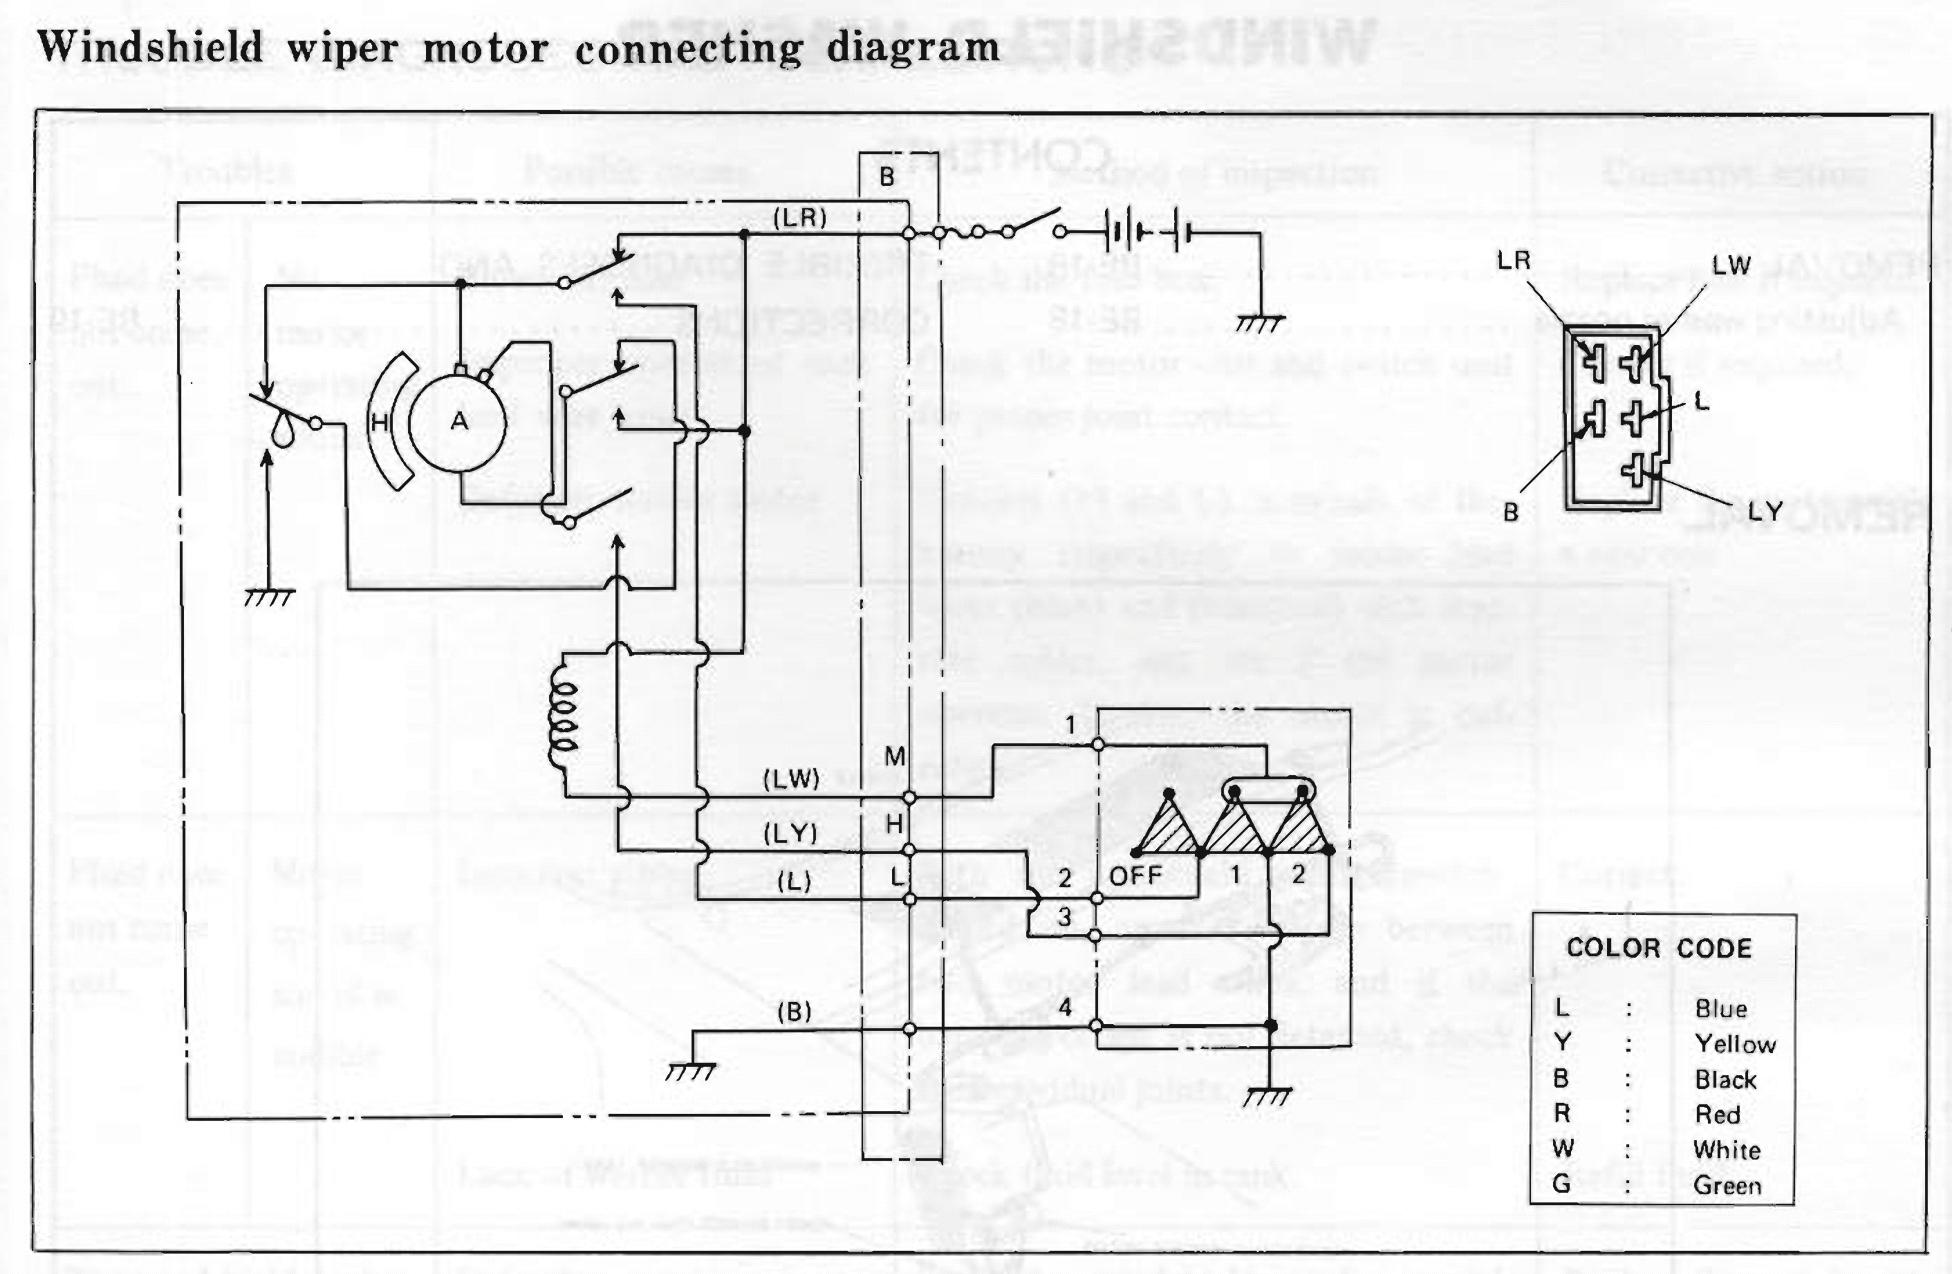 Basic S30 Wiring Diagram Question - Electrical